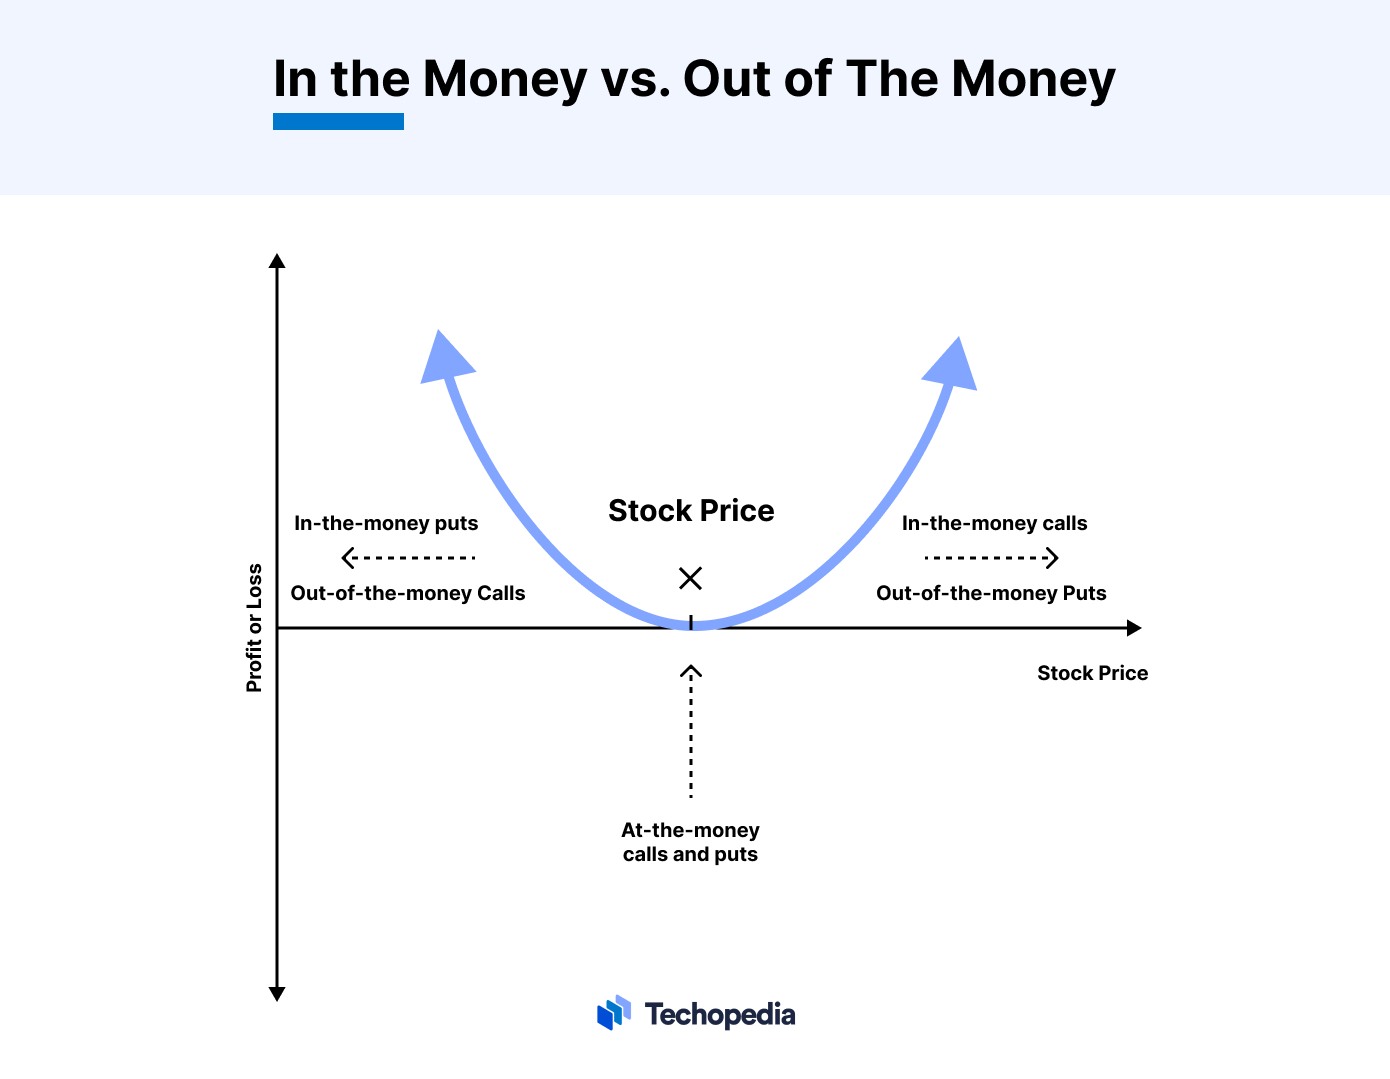 In the Money vs. Out of the Money